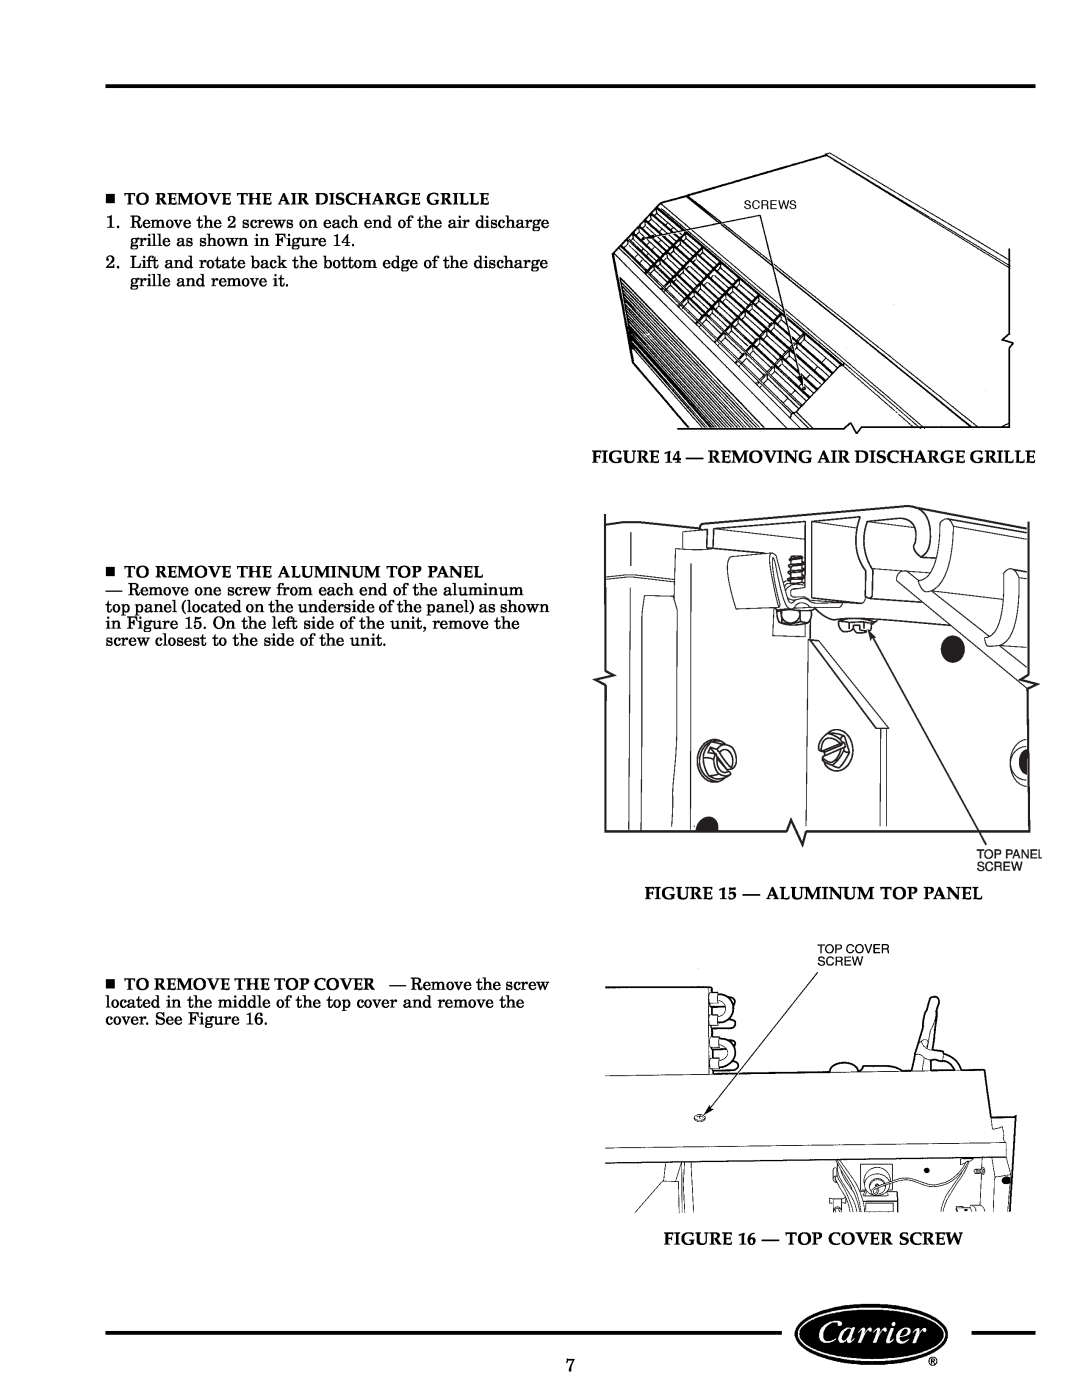 Carrier 52S manual To Remove The Air Discharge Grille, Ð Removing Air Discharge Grille, To Remove The Aluminum Top Panel 